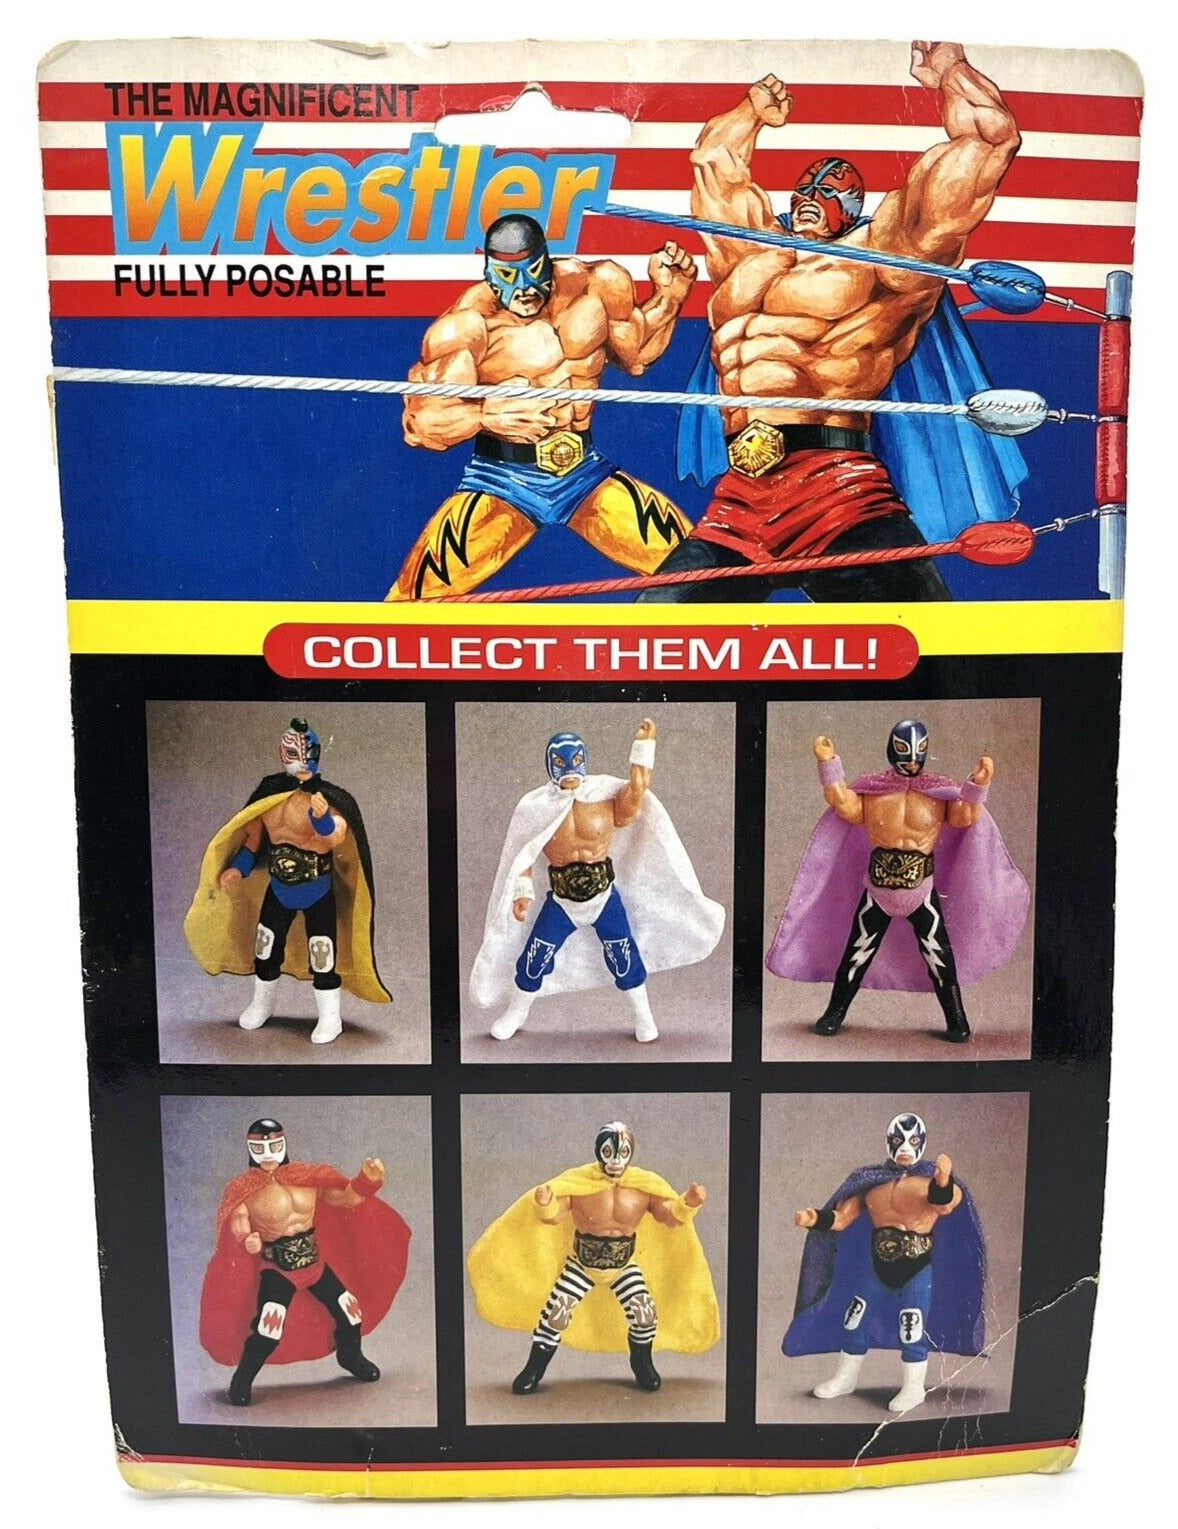 1993 The Magnificent Wrestler Series 1 Blue Panther